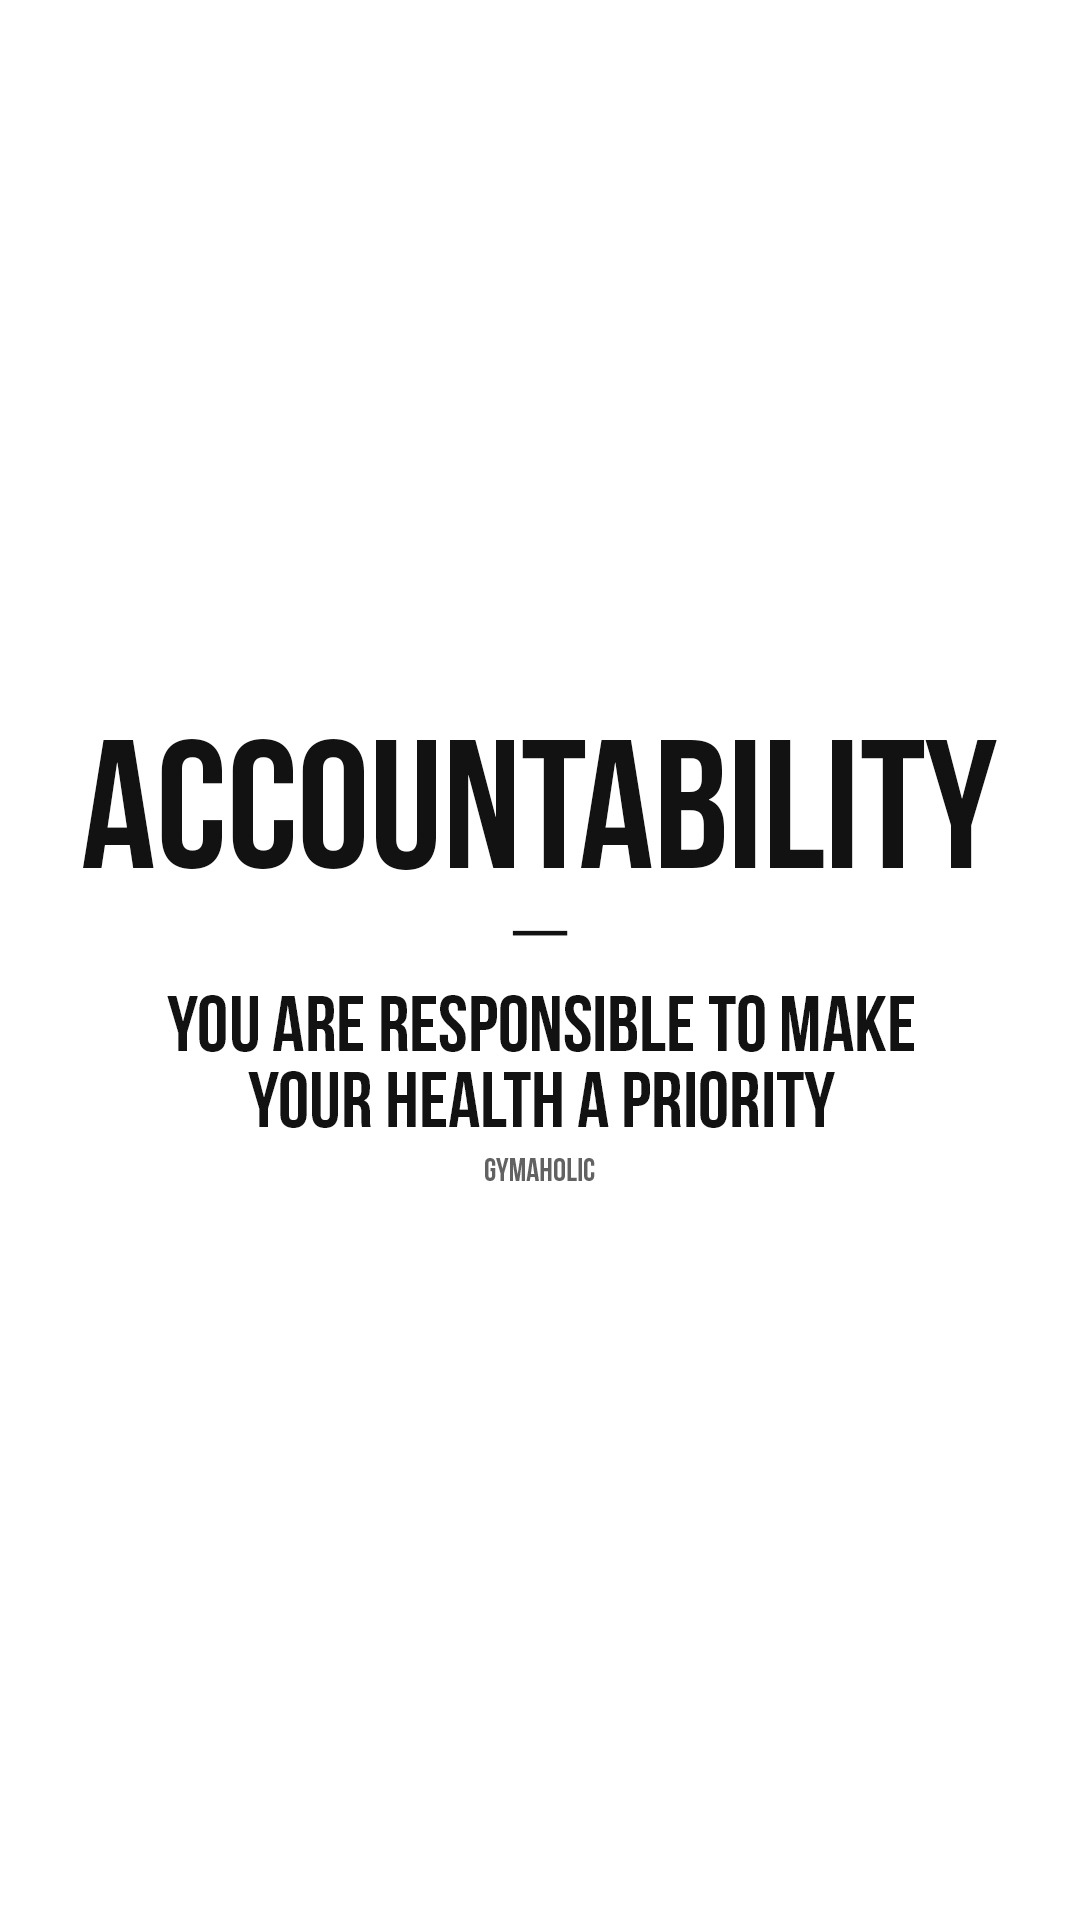 Accountability: you are responsible to make your health a priority